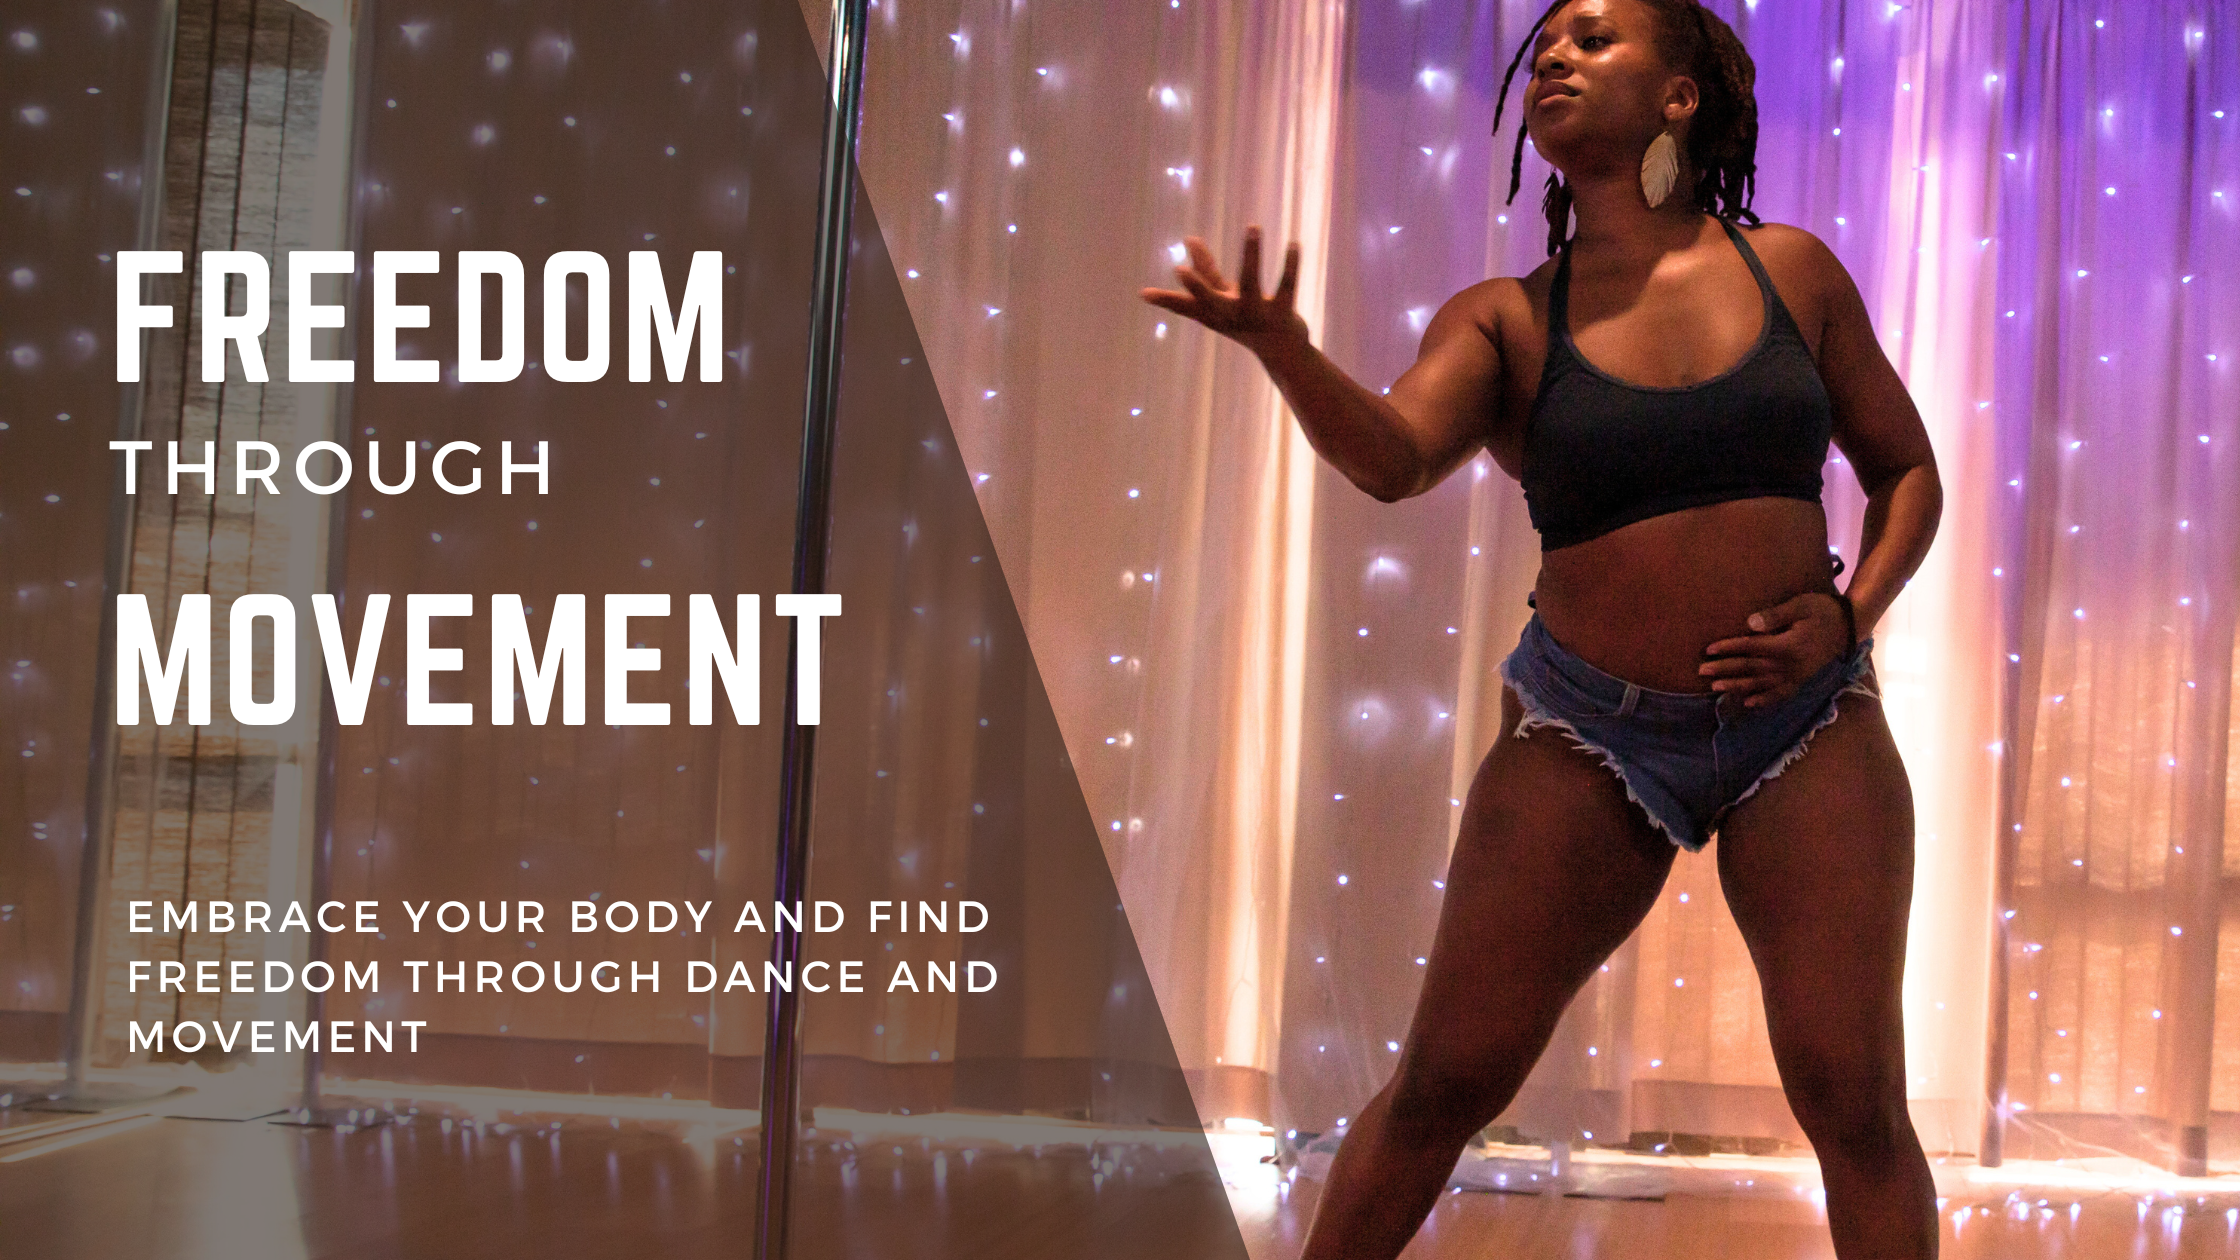 Dance your way to body positivity and self-love